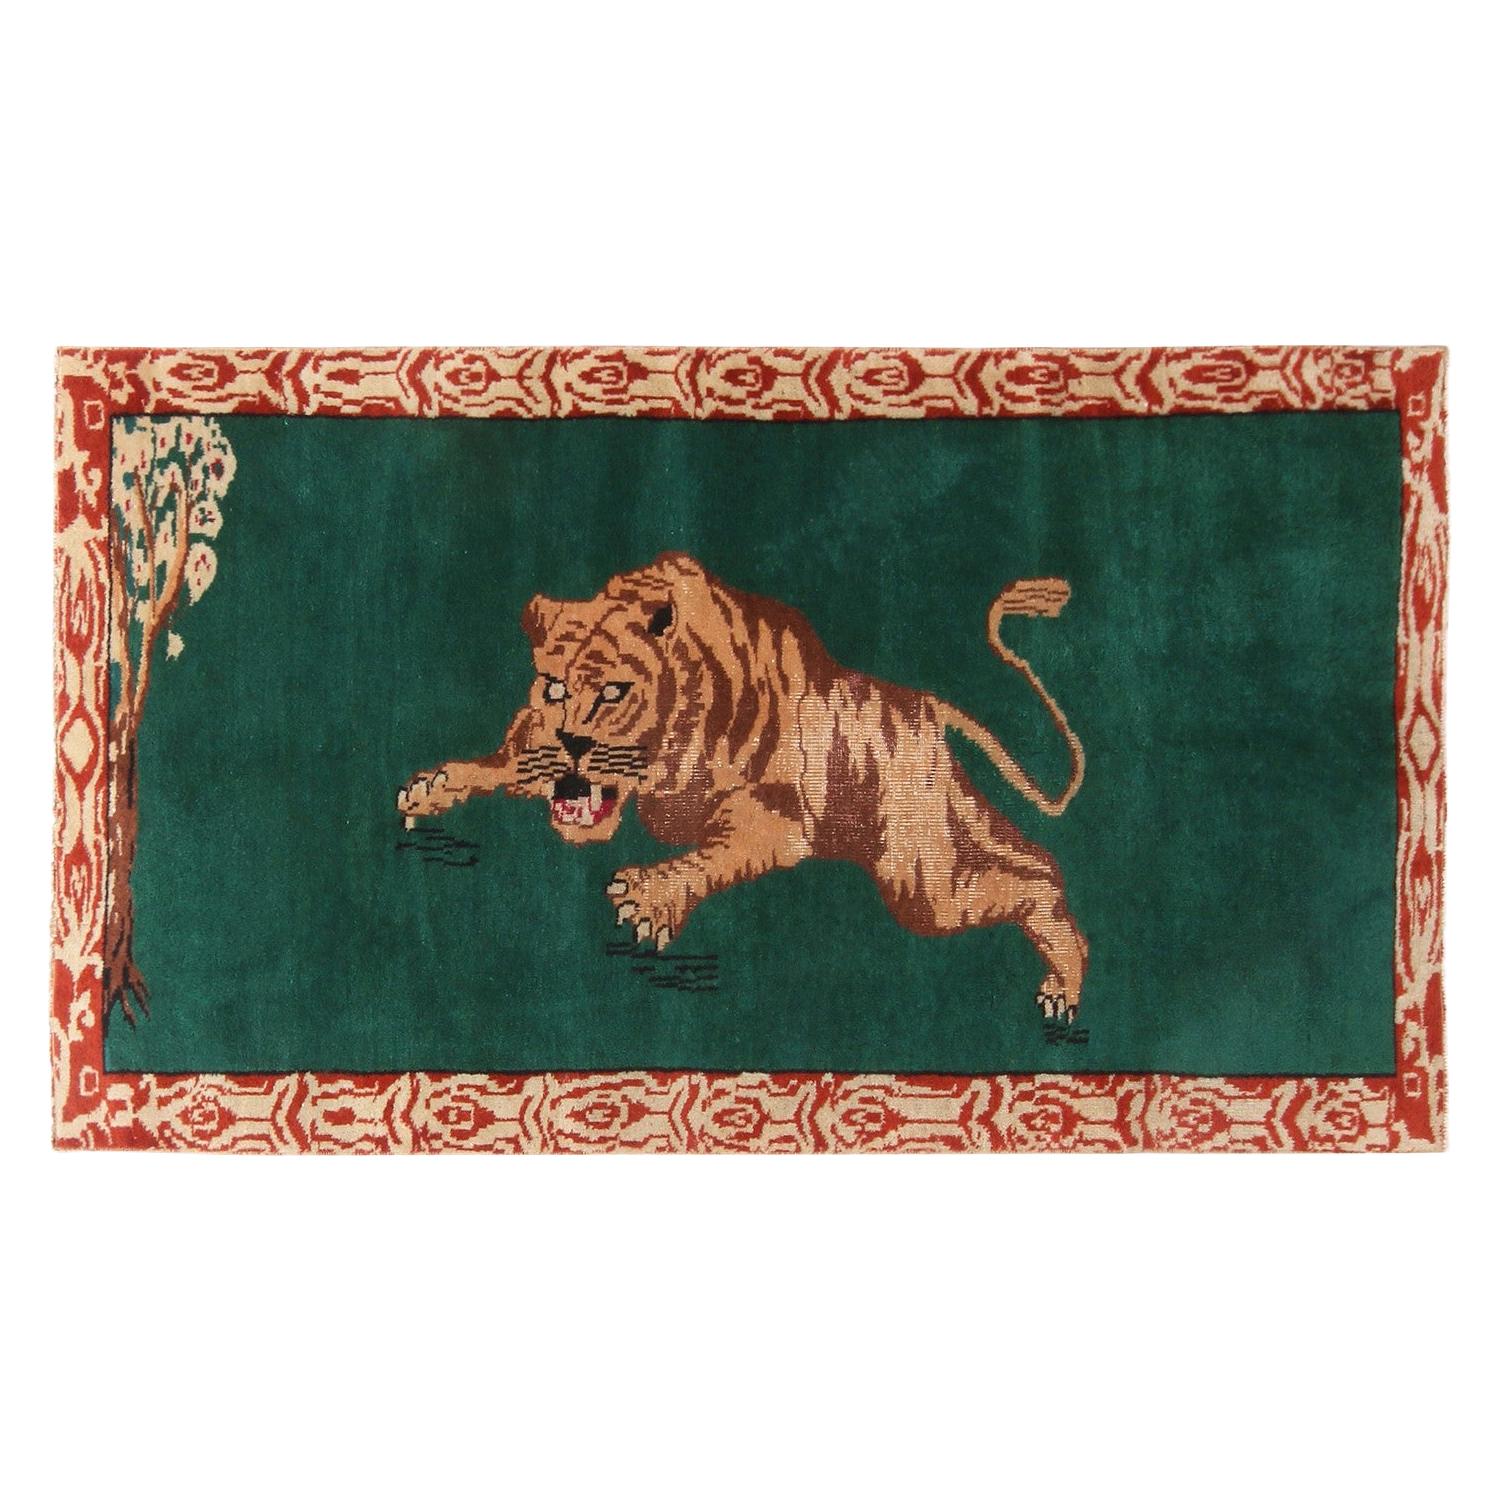 Vintage Midcentury Tiger Pictorial Green and Beige Wool Rug with Red Border Acc